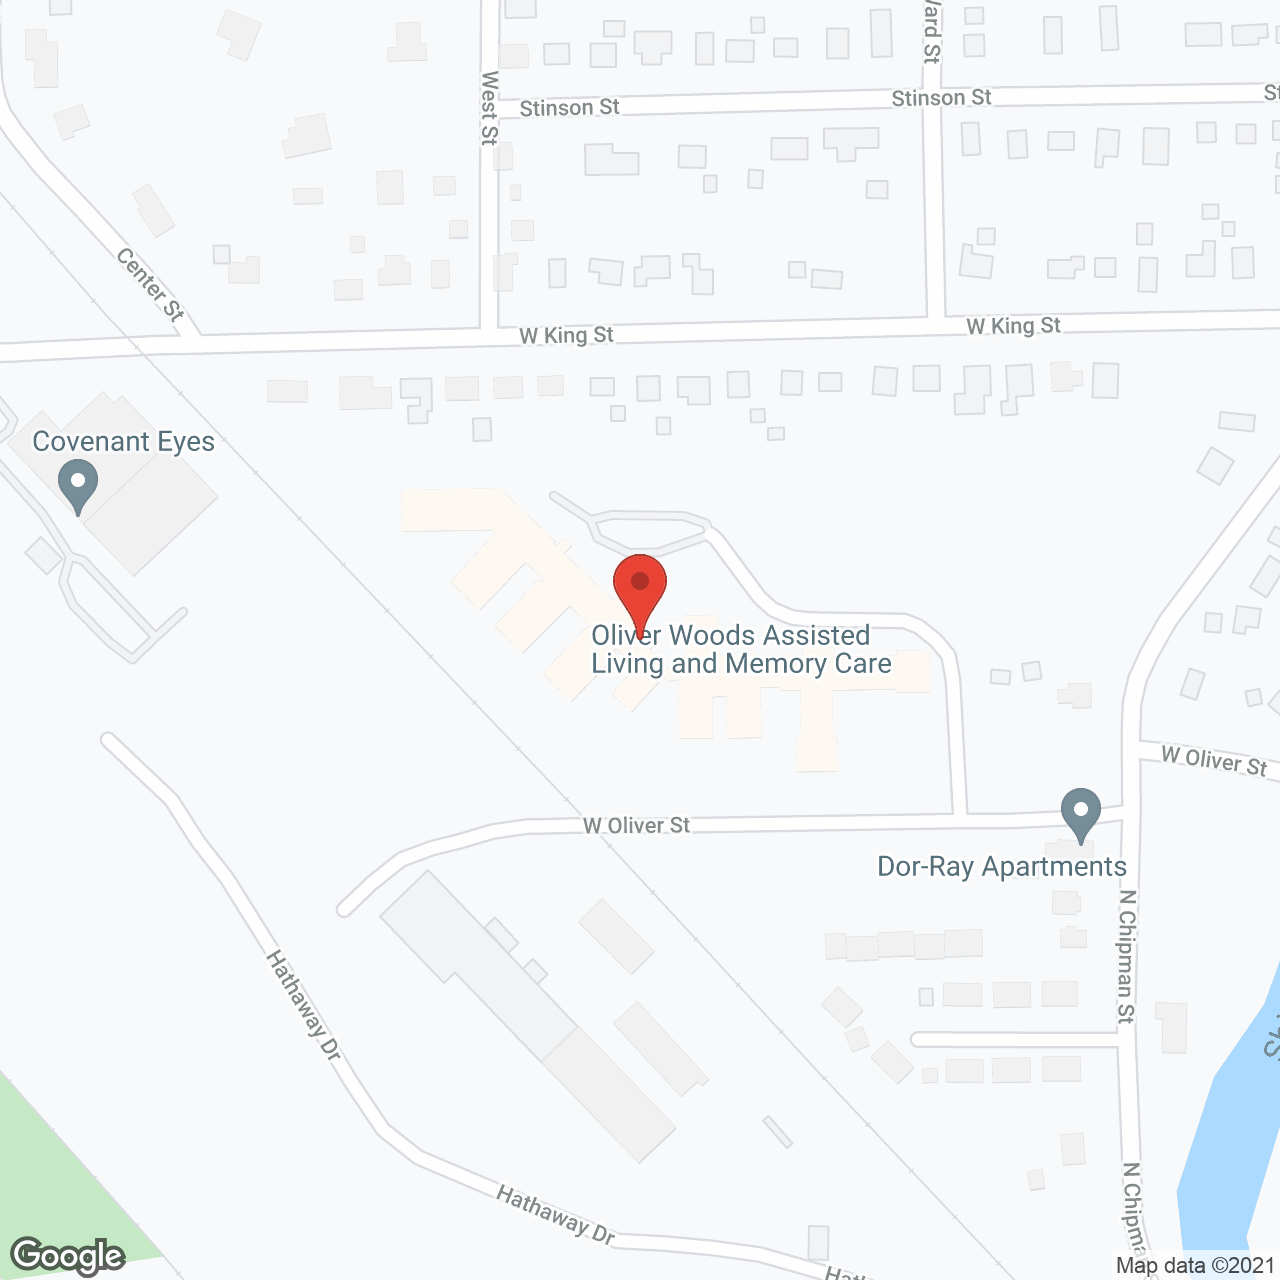 Oliver Woods Assisted Living and Memory Care in google map